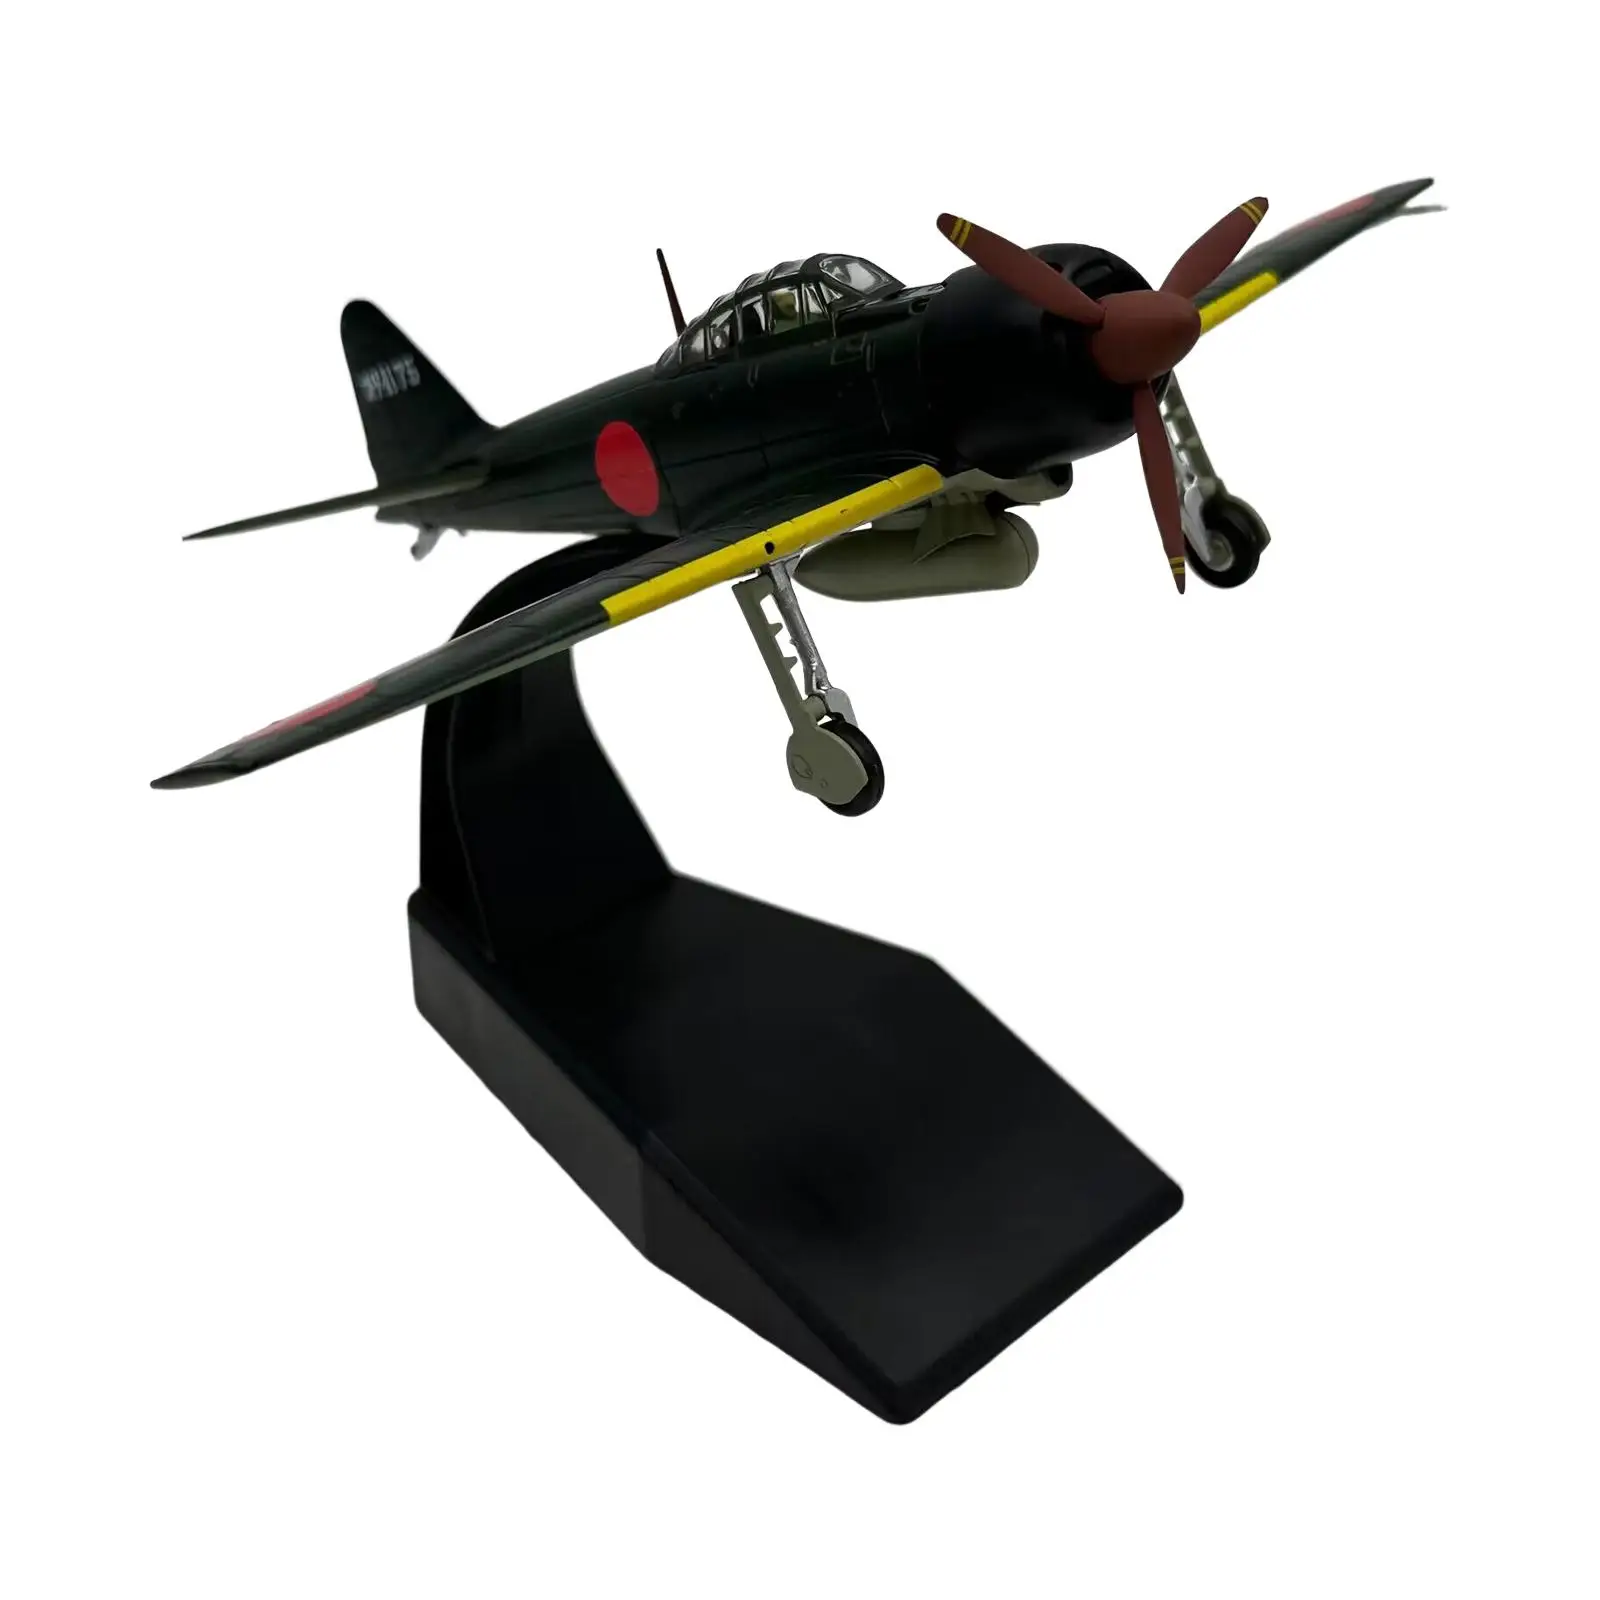 1/72 Simulation Diecast Planes Collection Display Ornaments Fighter Model for Desktop Bar Bedroom Table Birthday Gifts